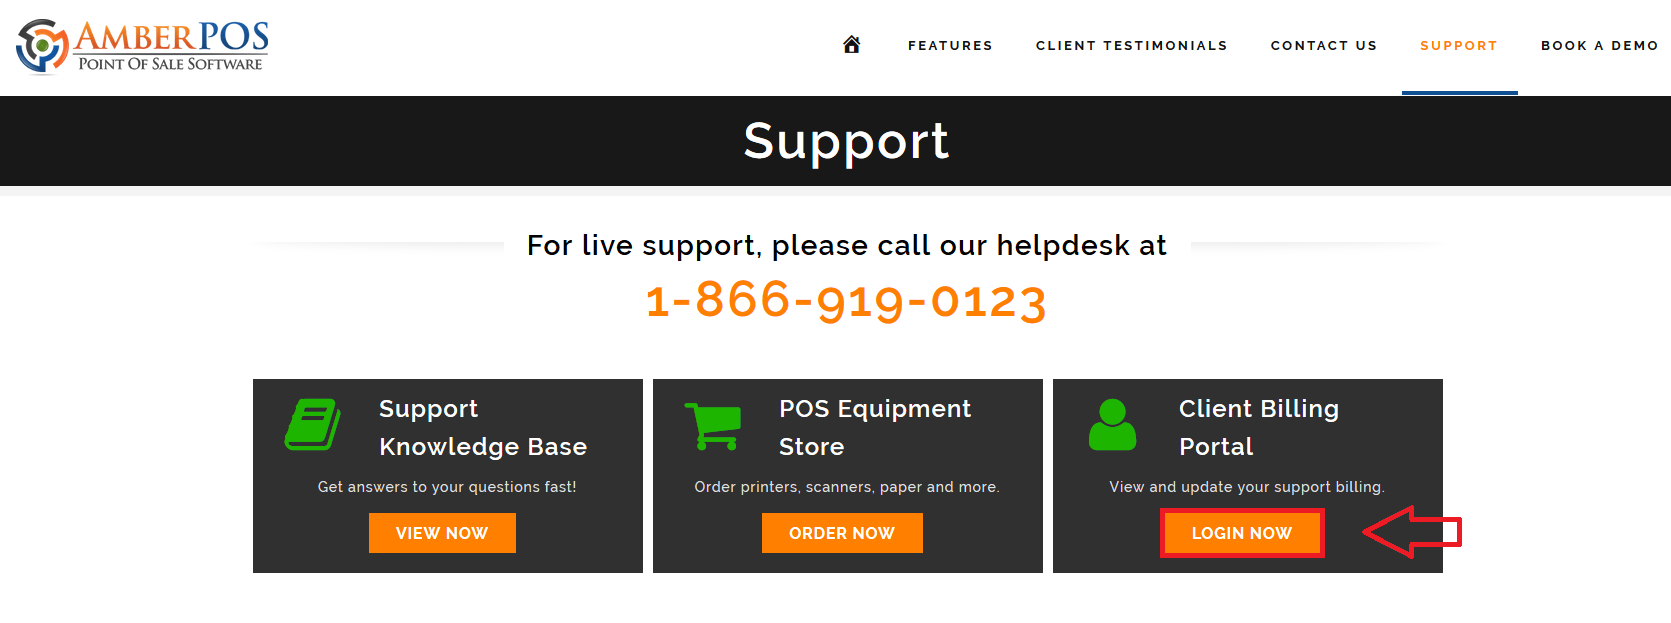 Support_page_of_website_2.png